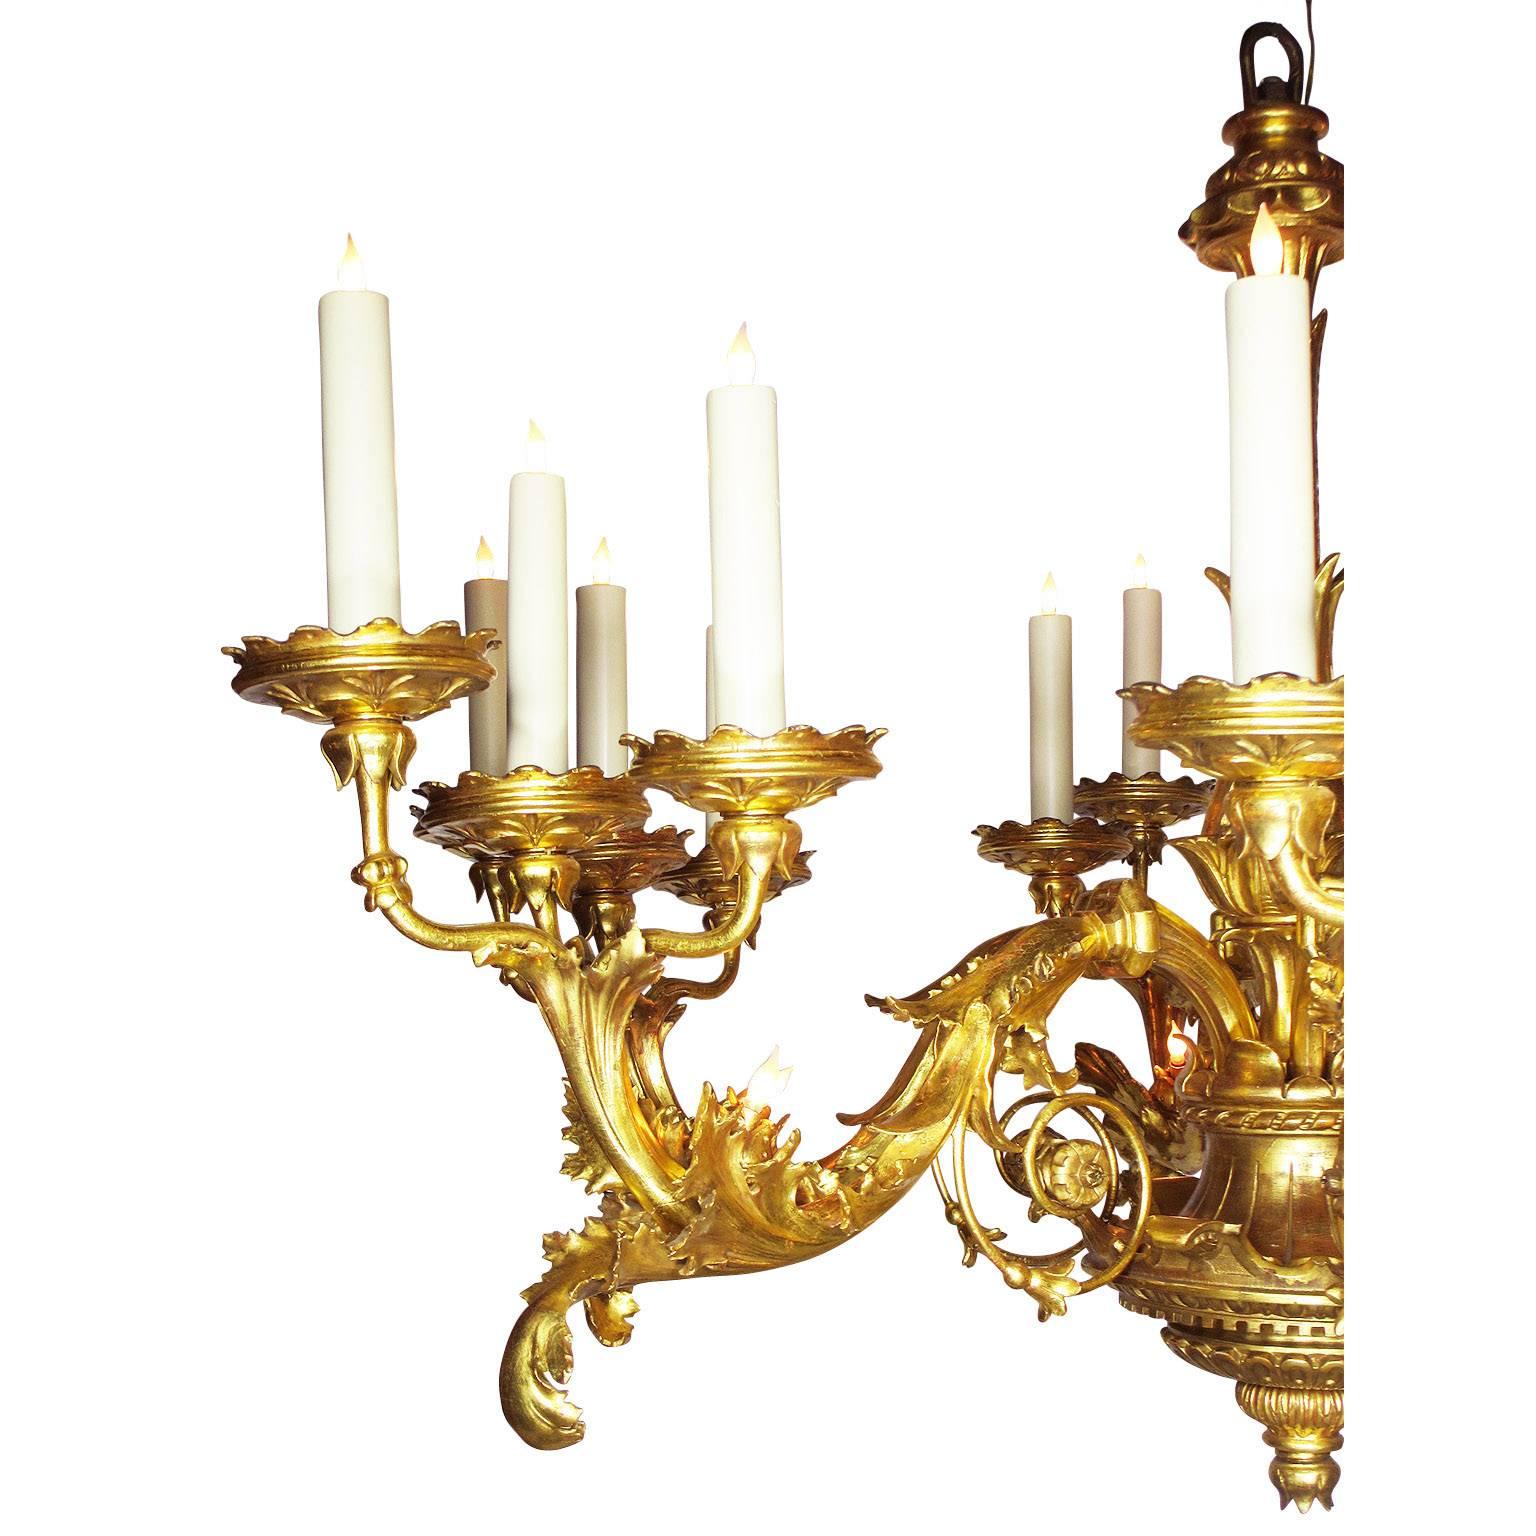 An important palatial very fine and rare Italian 19th century florentine Rococo giltwood carved six-candle arms and twenty four-light chandelier, the scrolled candle-dish supports are gilt-cast iron. The scrolled candle arms, each with three